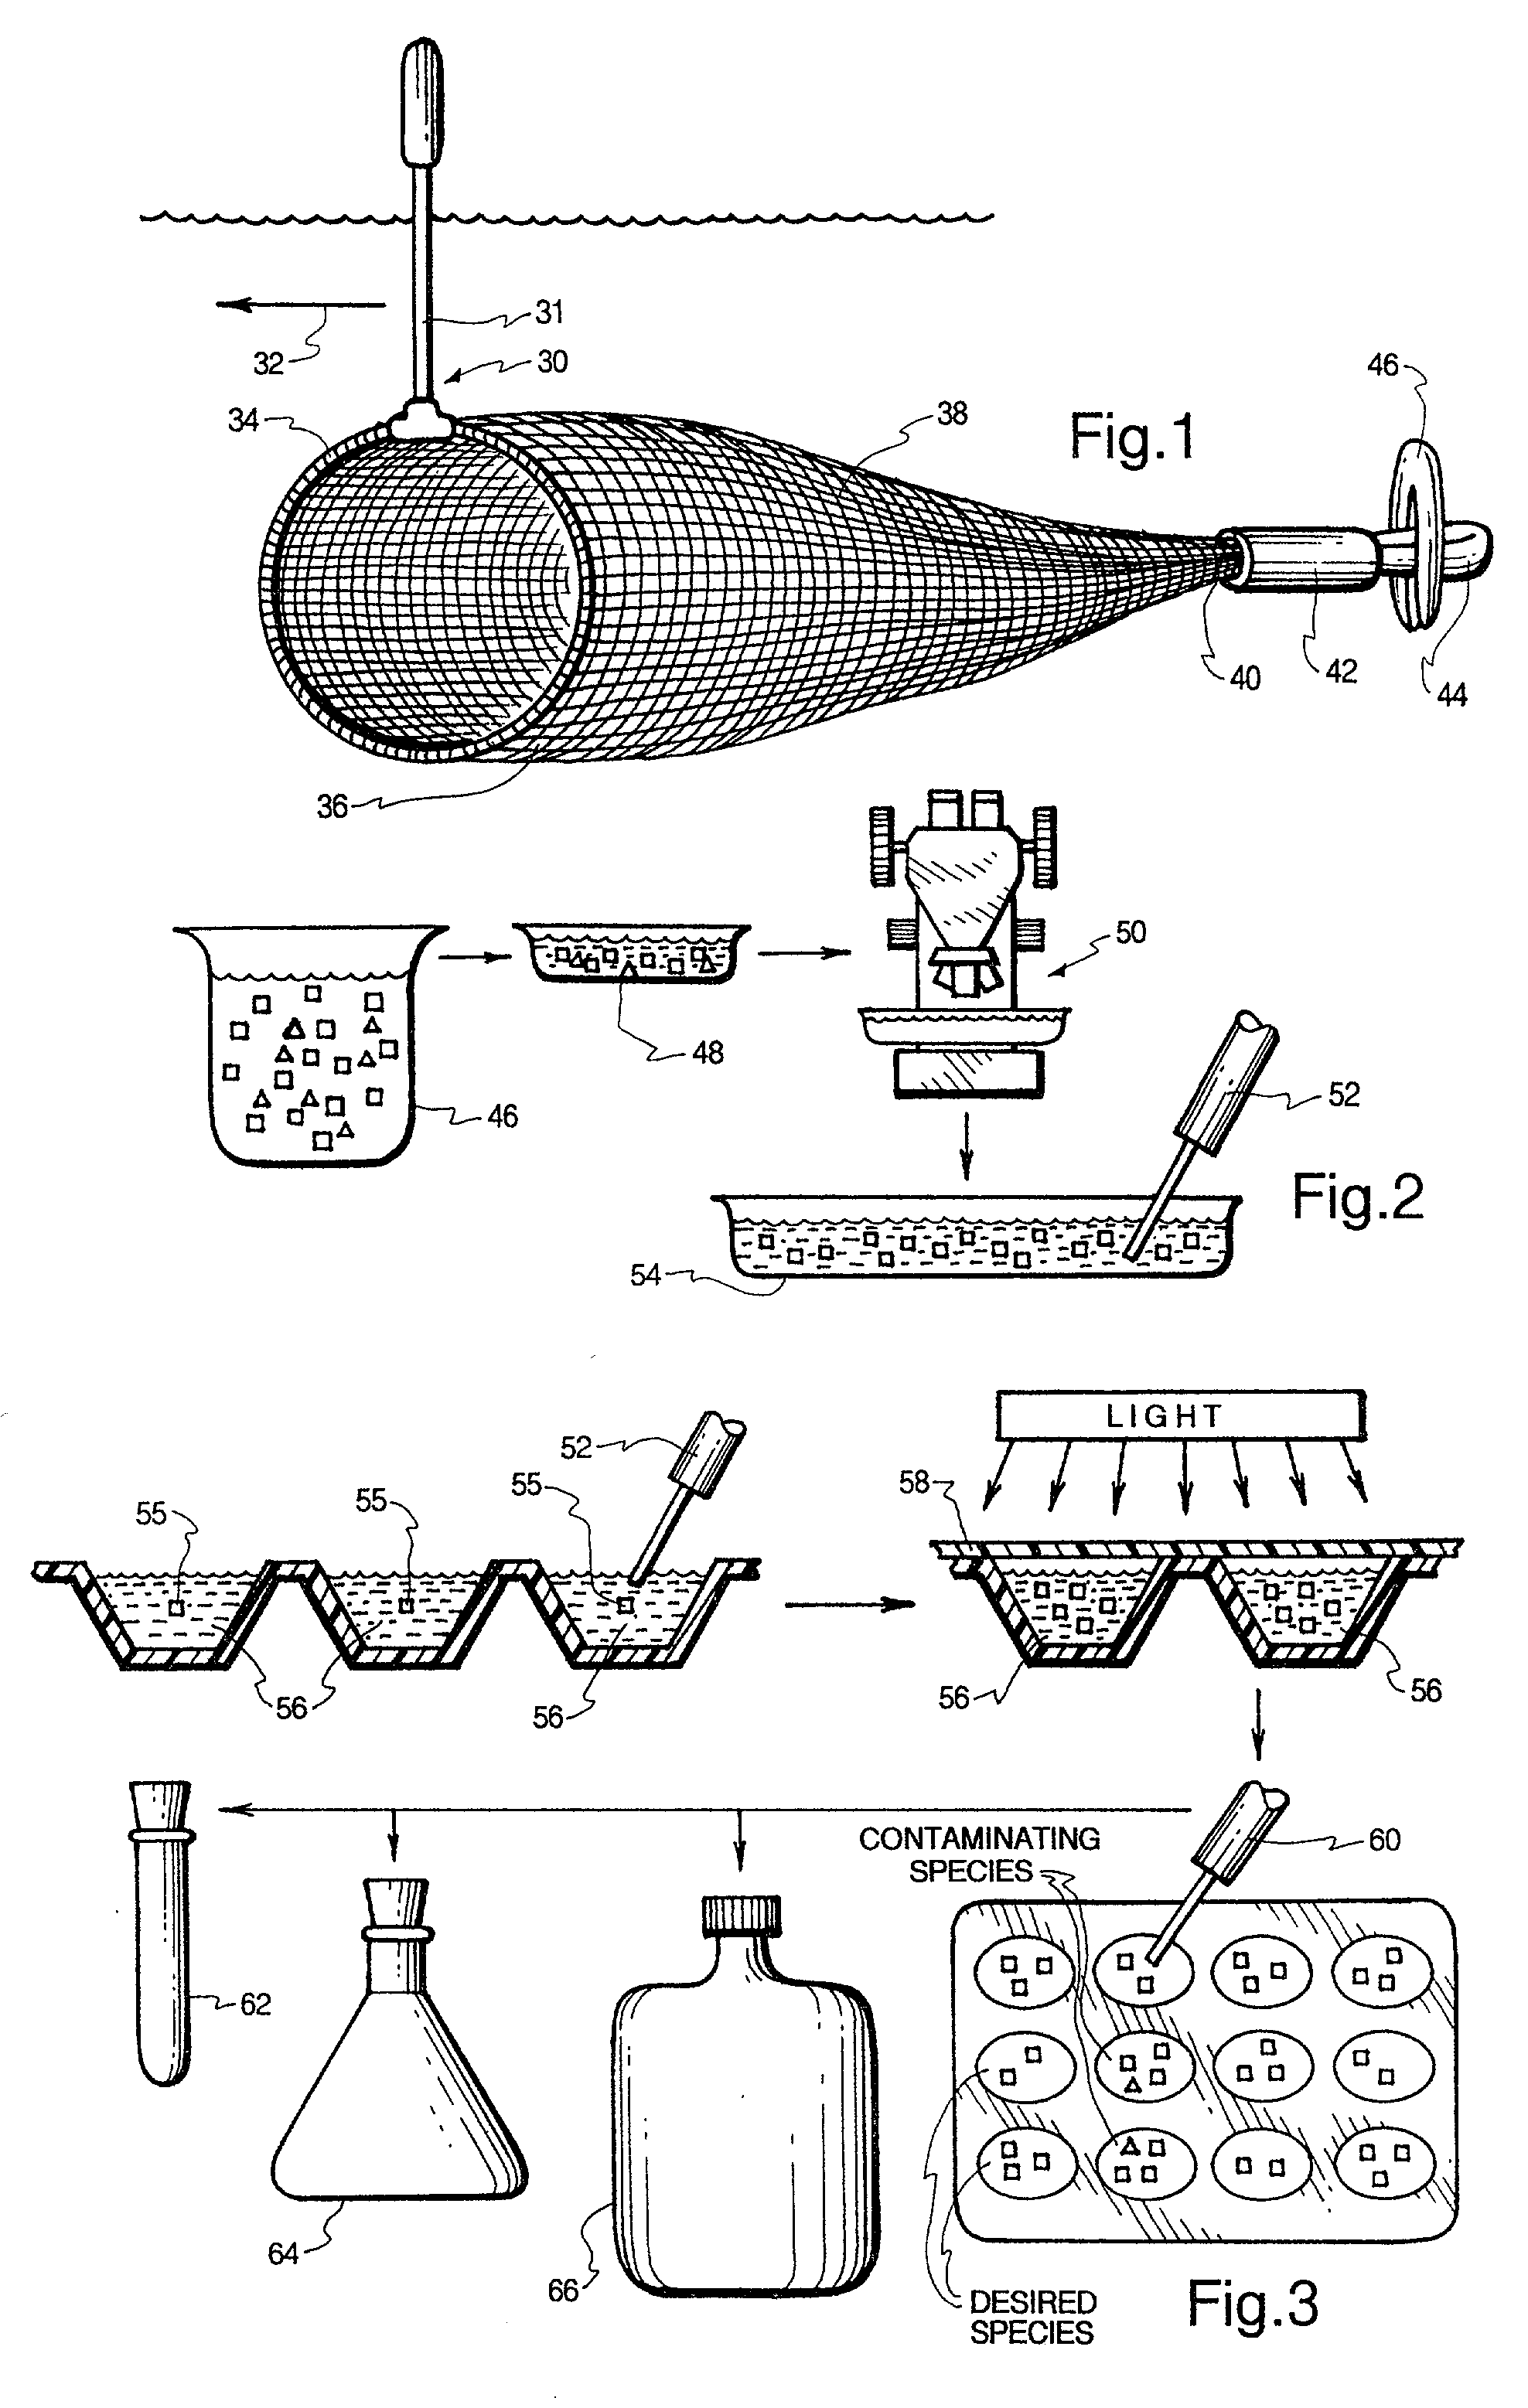 Process and apparatus for isolating and continuosly cultivating, harvesting, and processing of a substantially pure form of a desired species of algae